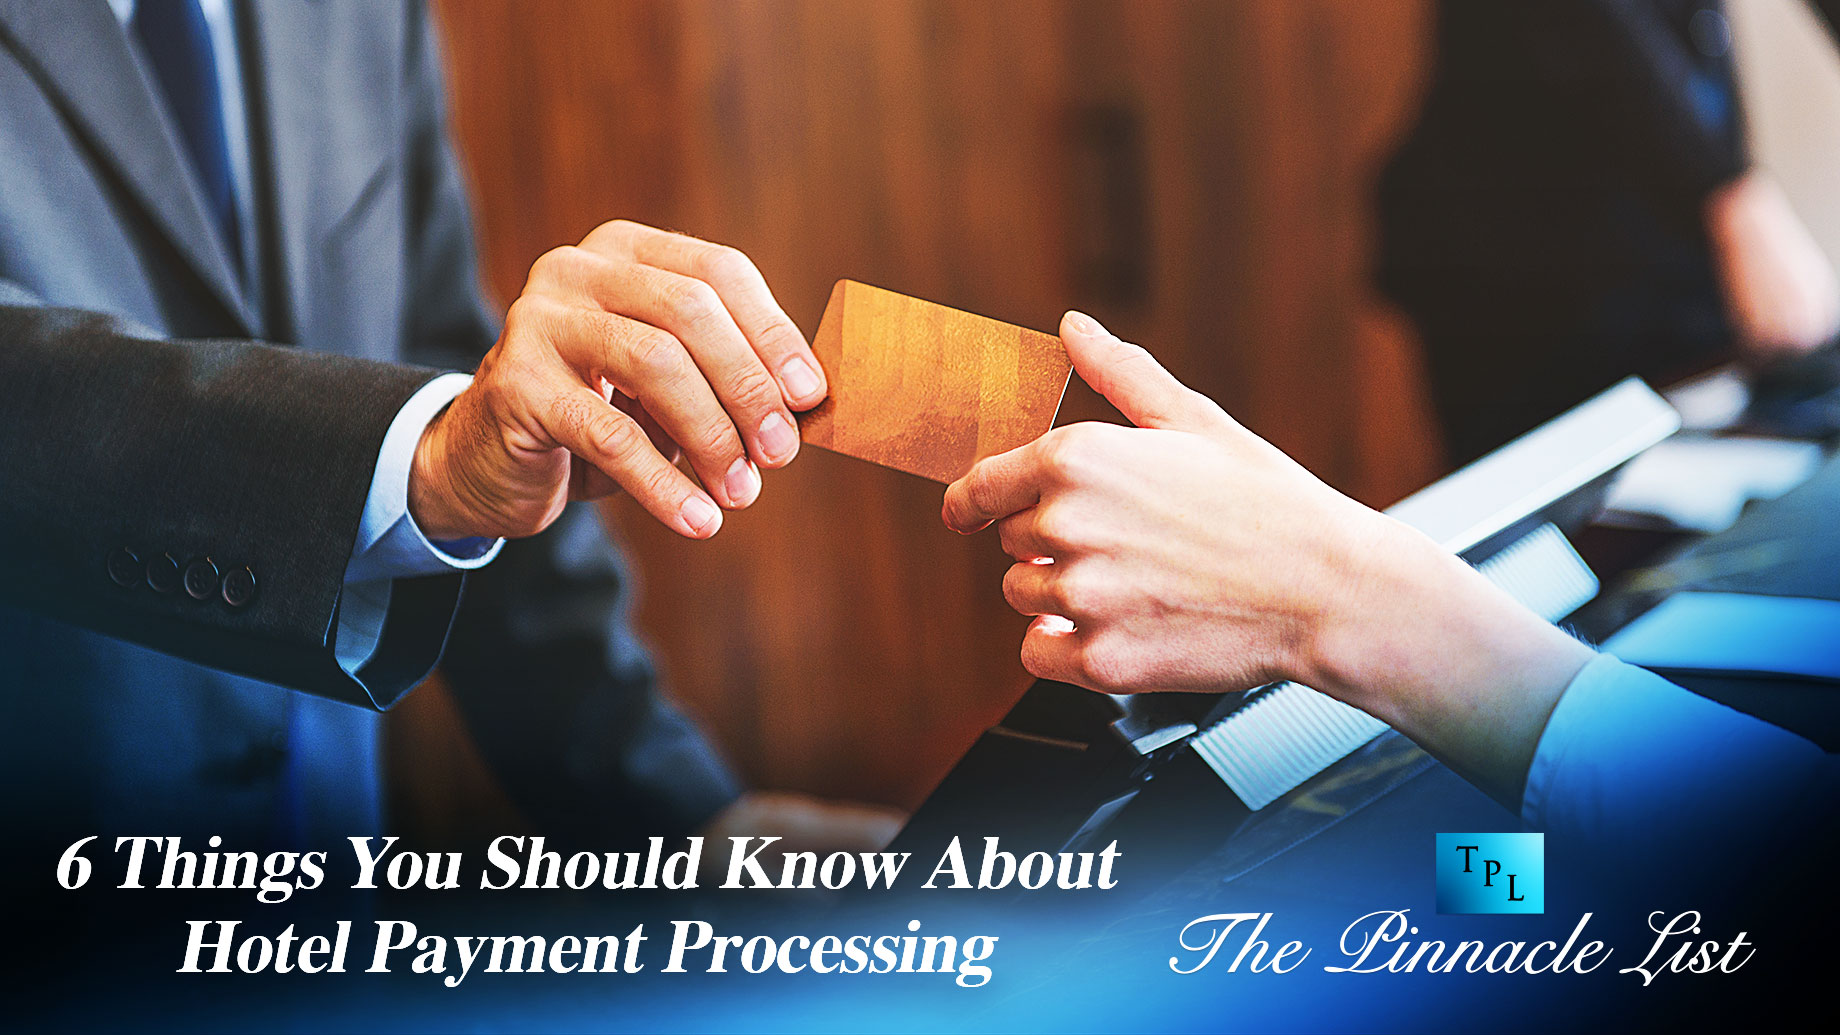 6 Things You Should Know About Hotel Payment Processing